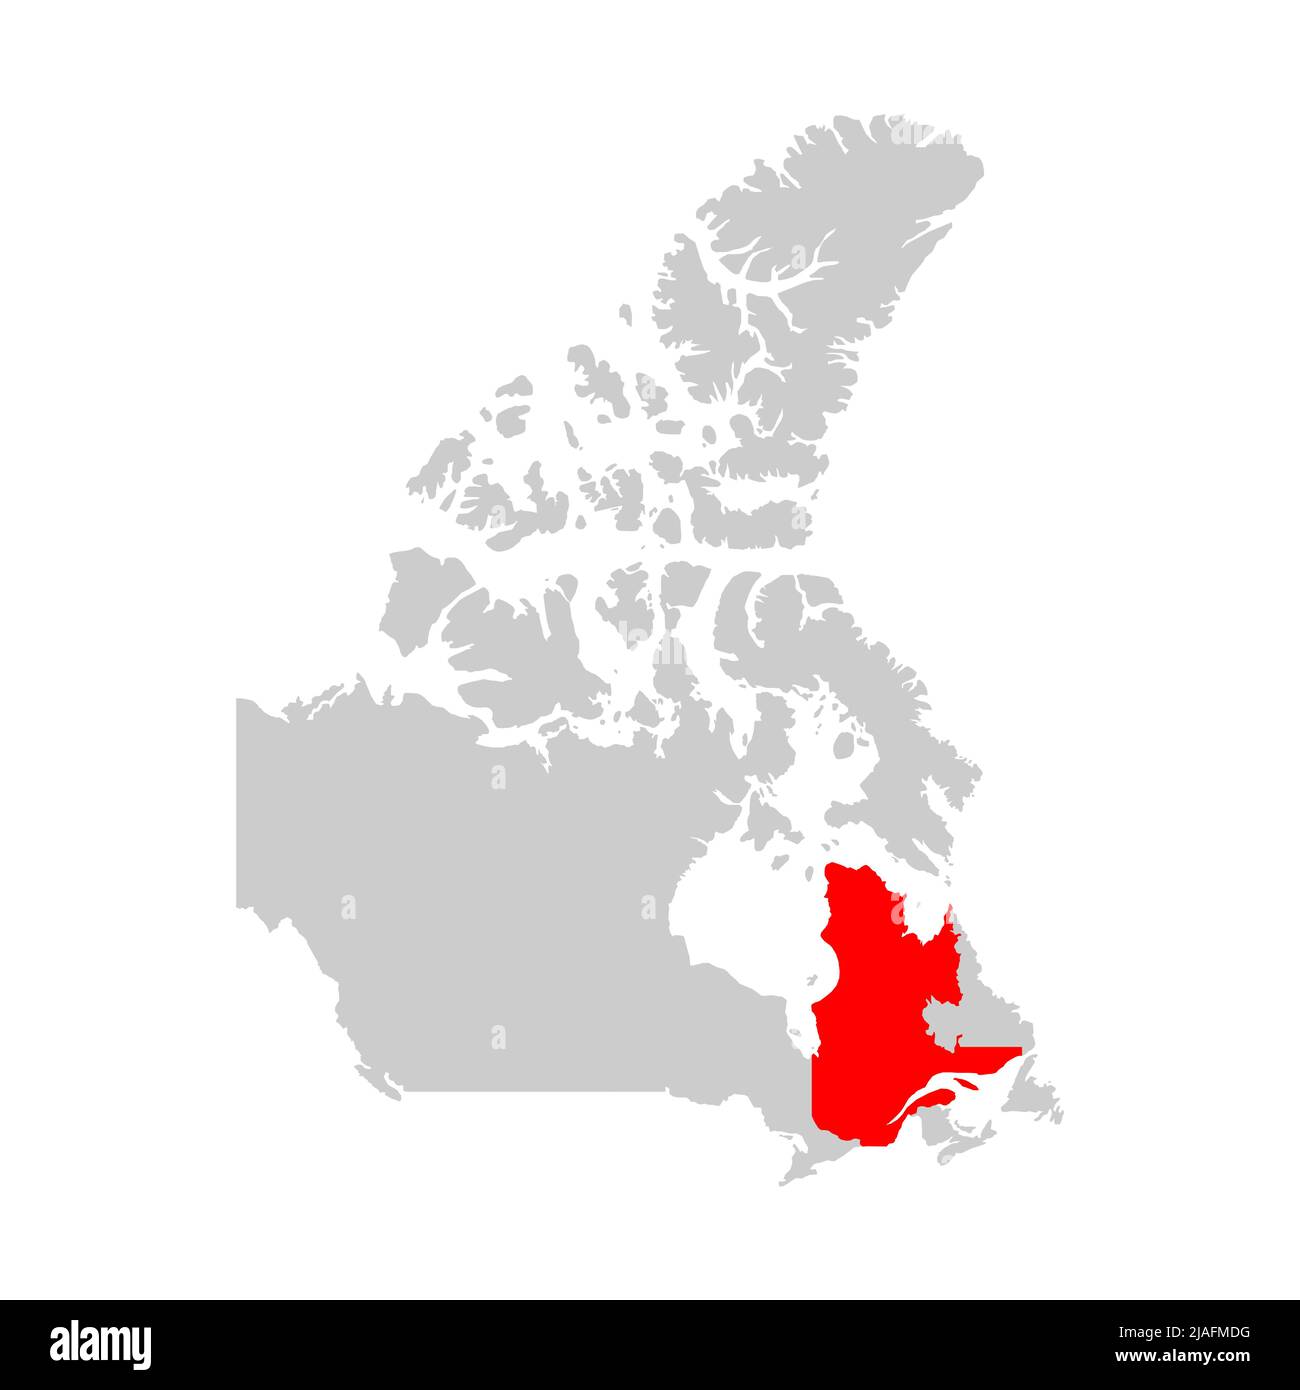 Quebec province highlighted on the map of Canada Stock Vector